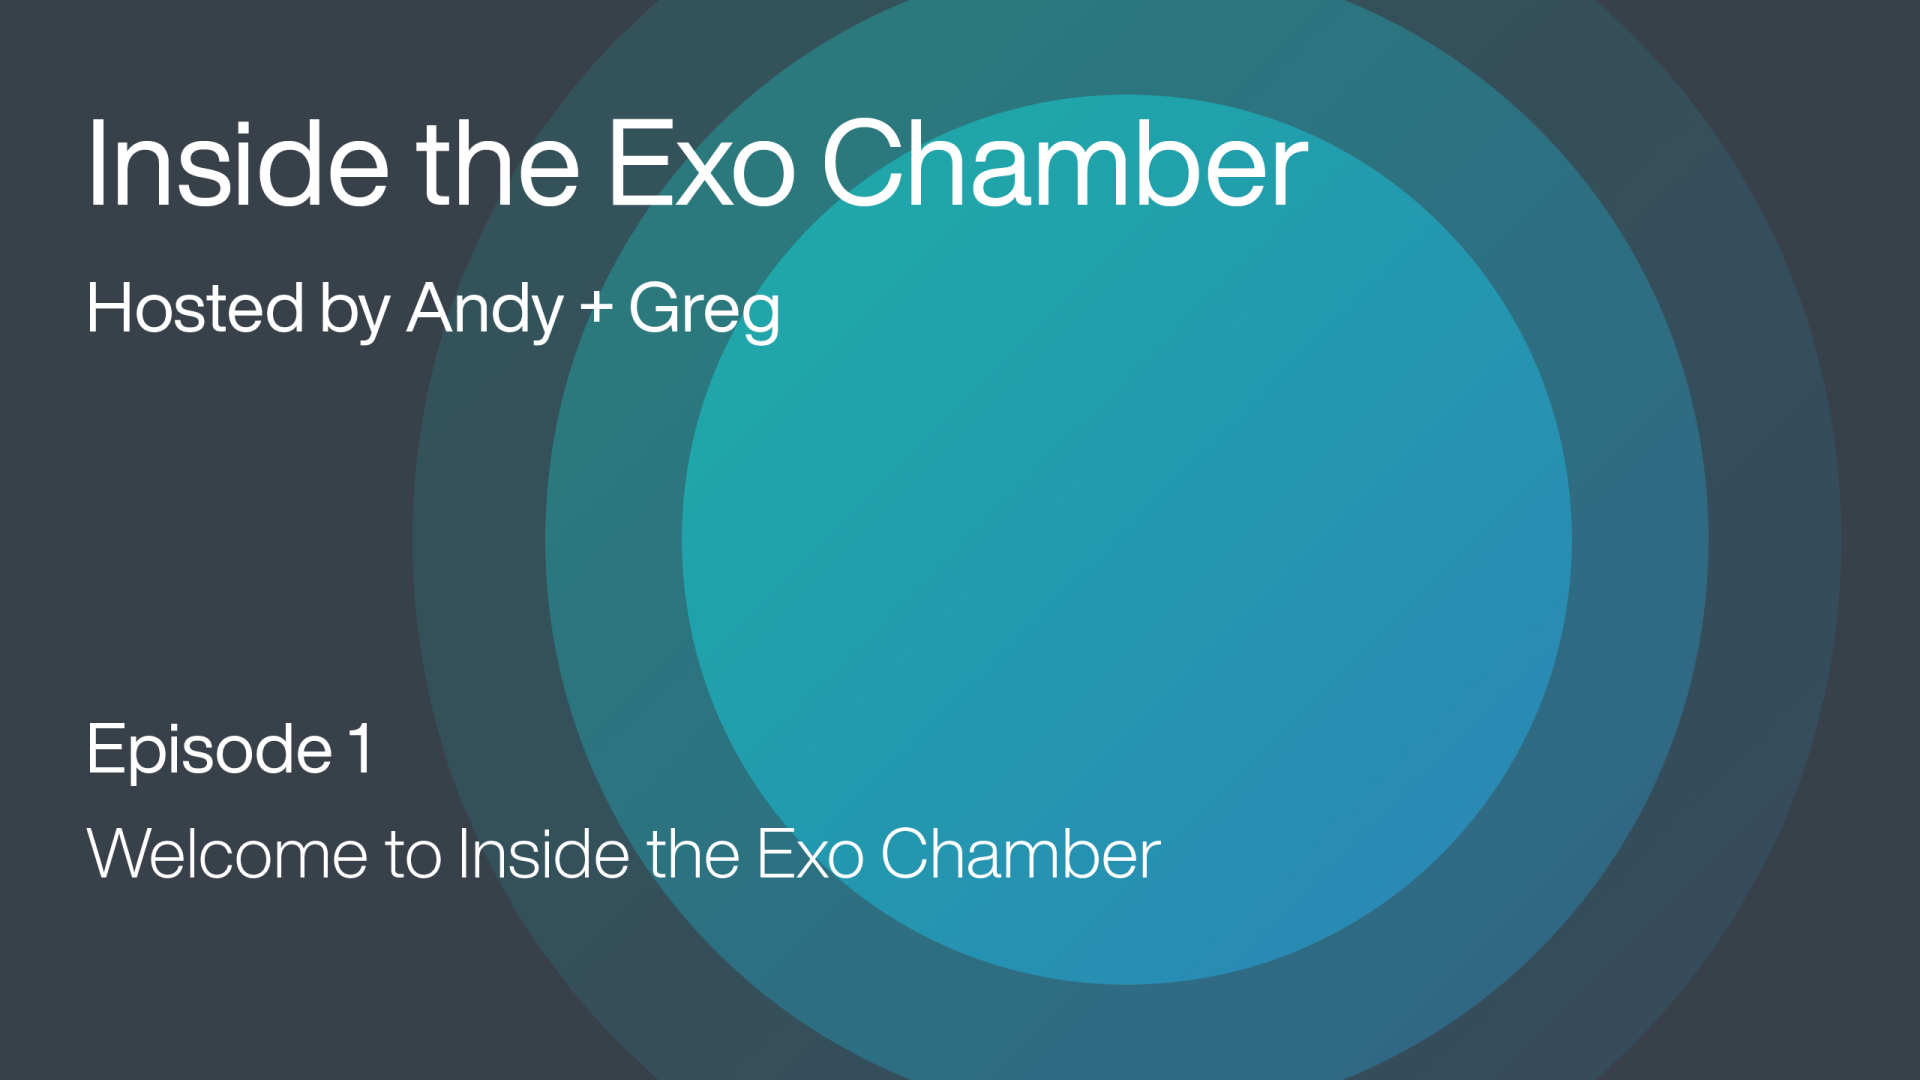 Welcome to Inside the Exo Chamber